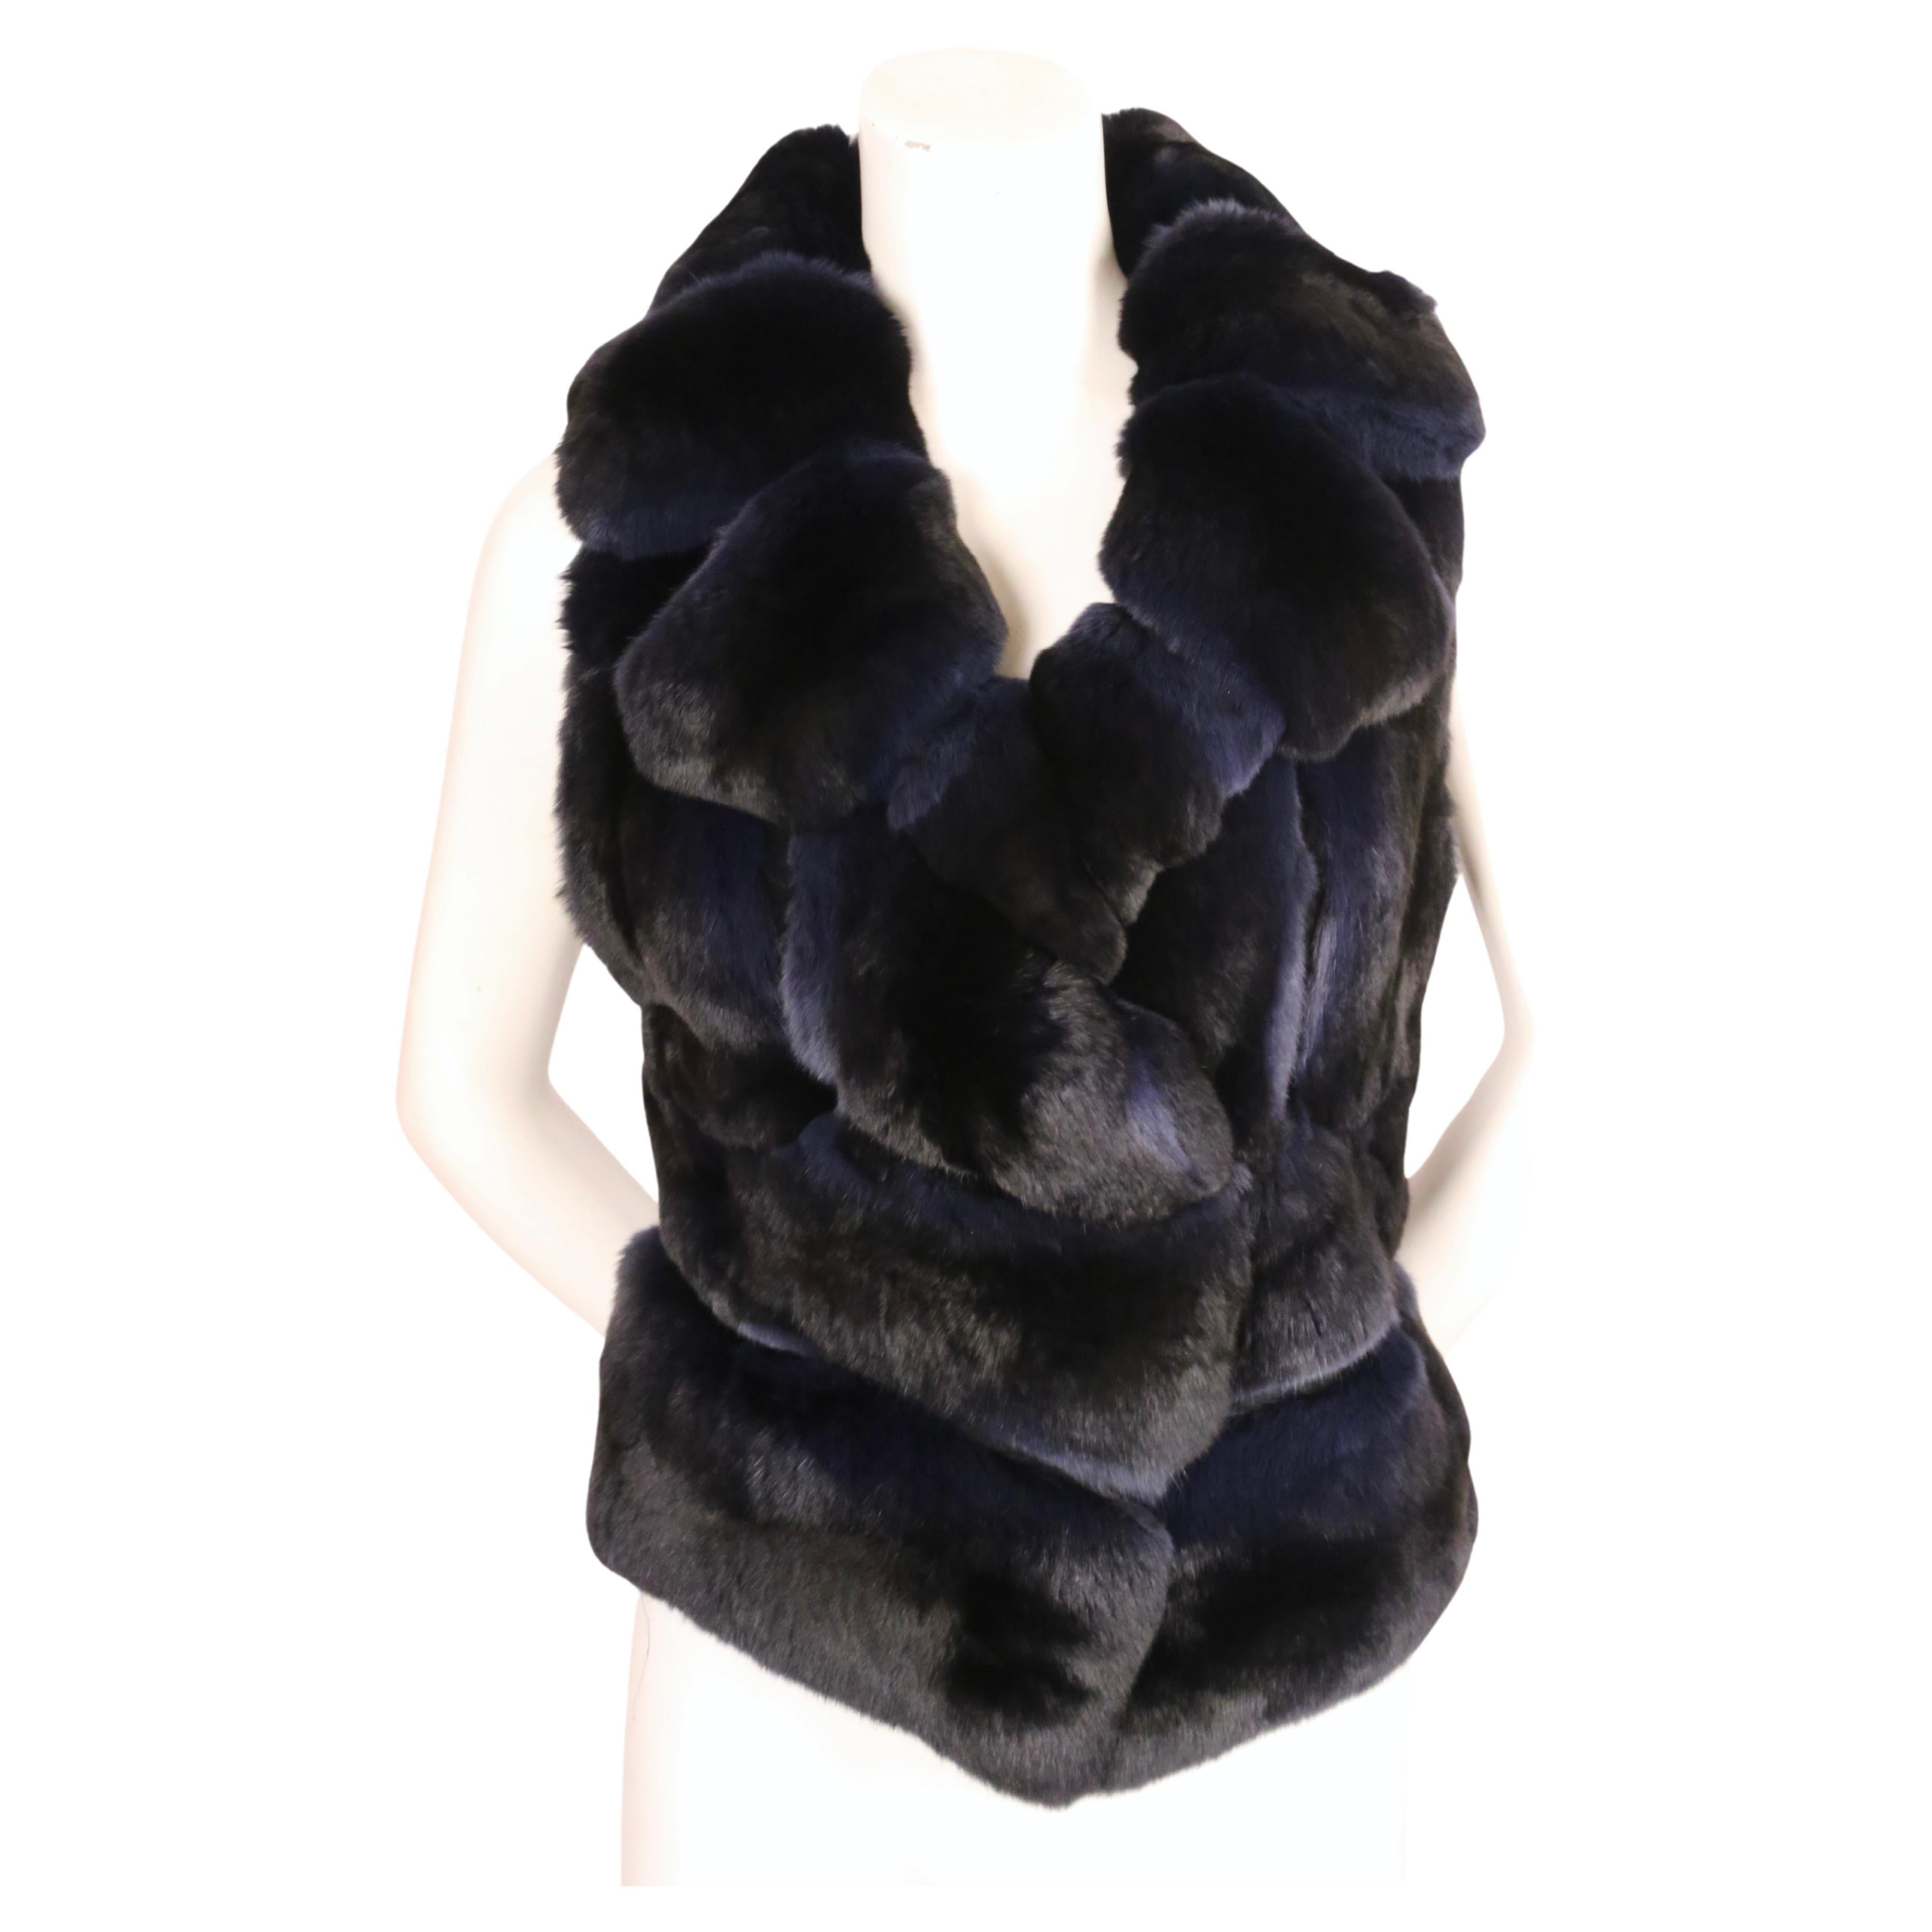 Striking blue and black dyed Chinchilla vest from J. Mendel. Very flattering seam construction and subtle ombre colorway. There is no size indicated, however this best fits a US 2-4. If the fur hook is moved, it can accommodate more sizes.